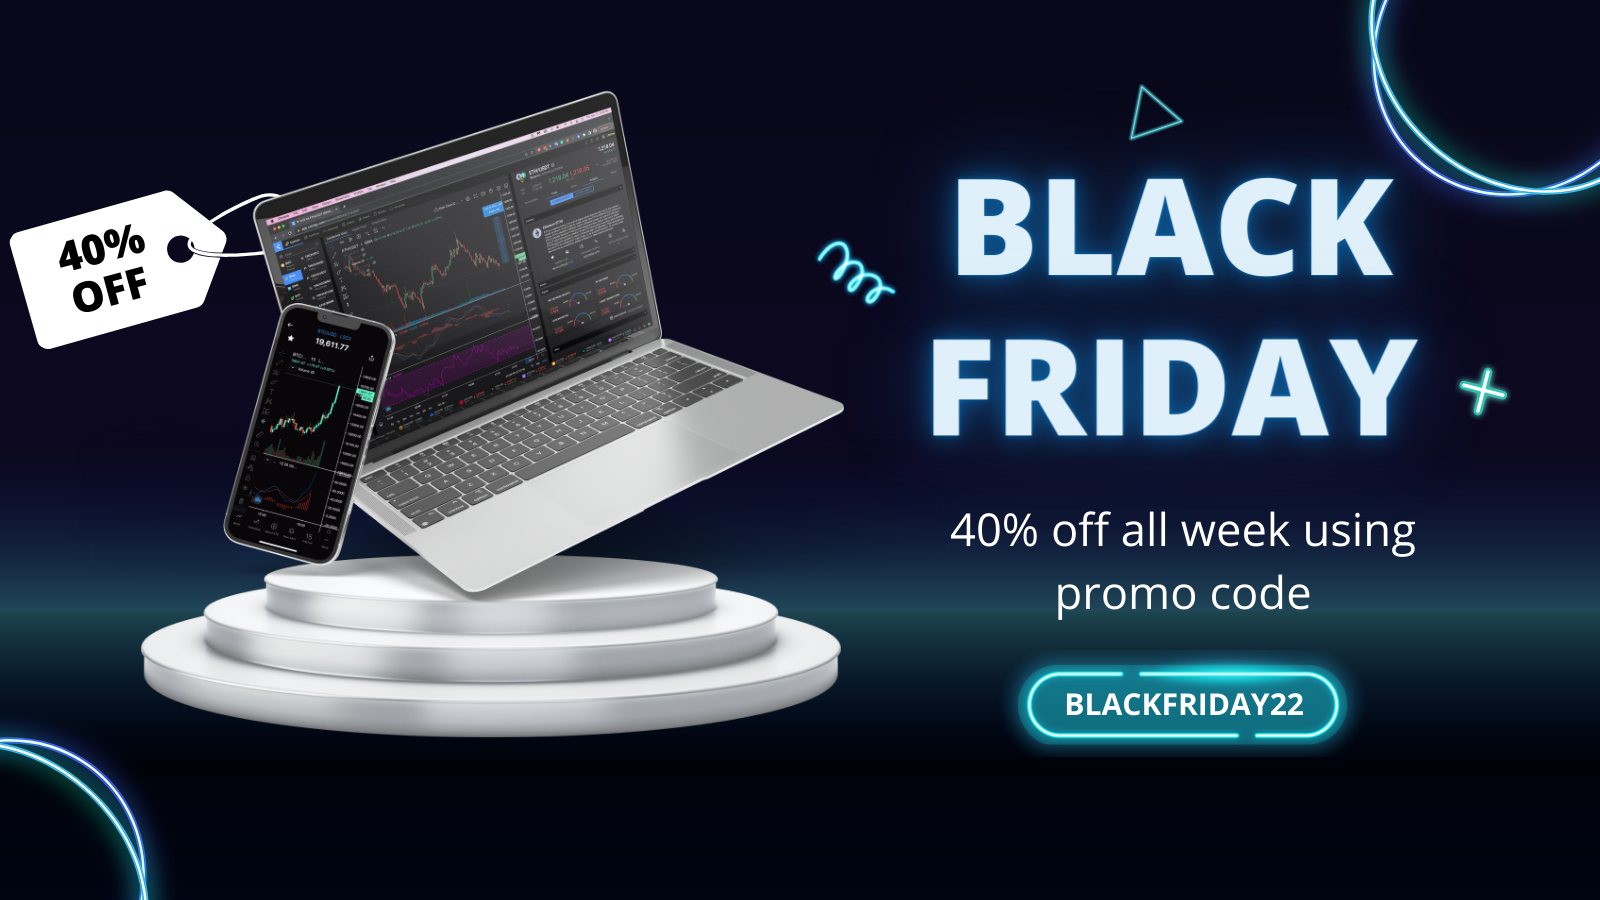 Coinigy Black Friday is LIVE